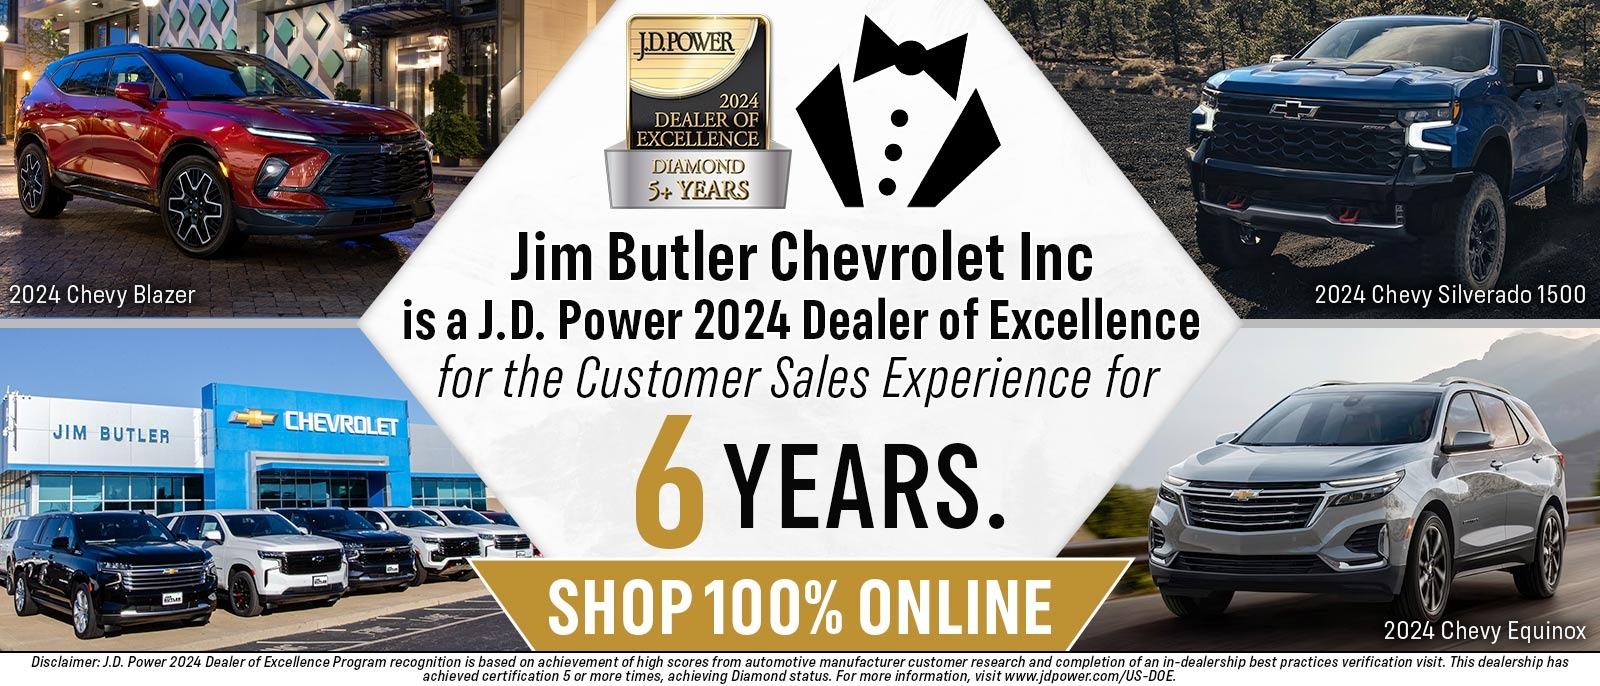 Jim Butler Chevrolet is a J.D. Power 2024 Dealer of Excellence for the Customer Sales Experience for 6 Years.